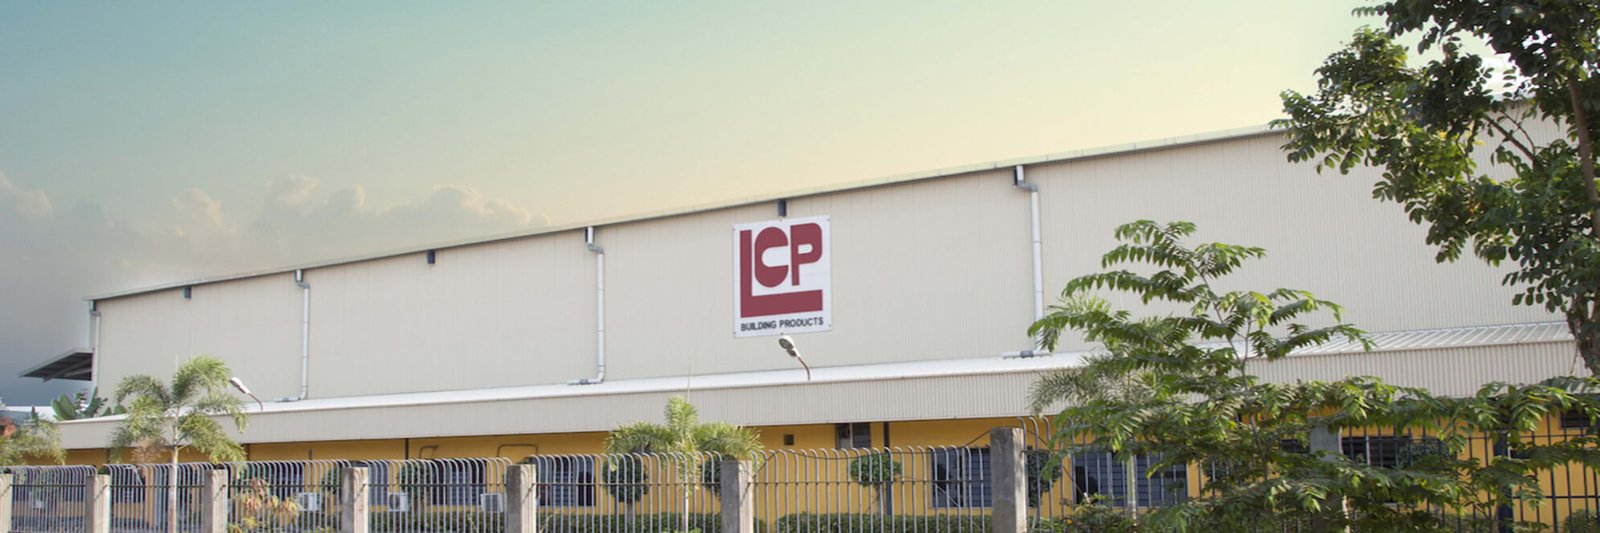 best roof sheet manufacturer in Haryana: LCP Sliders